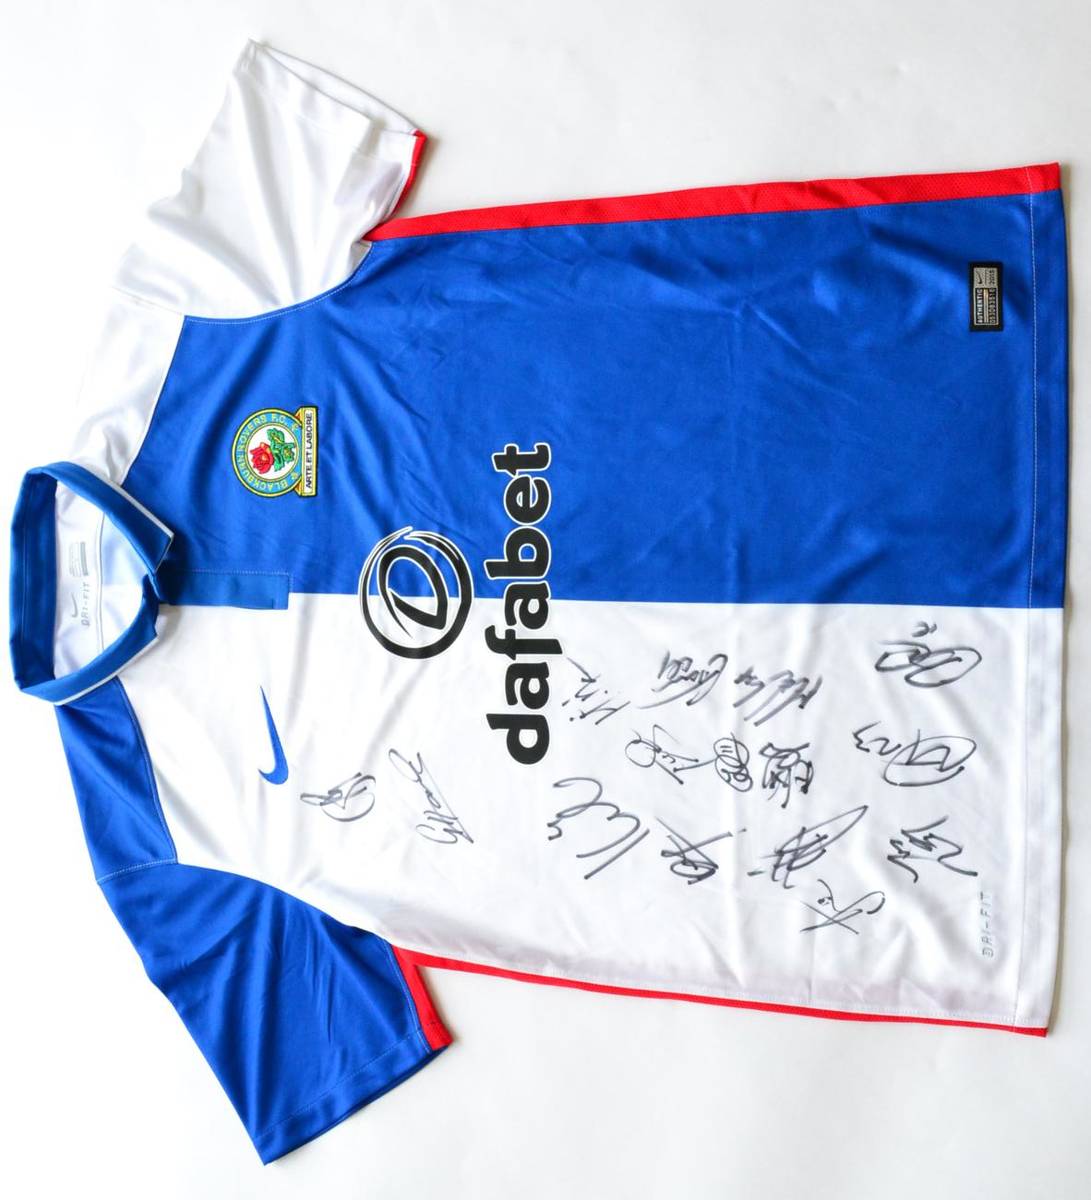 Lot 23 - Signed Football Shirt Blackburn Rovers, Blue/White with Certificate of Authenticity